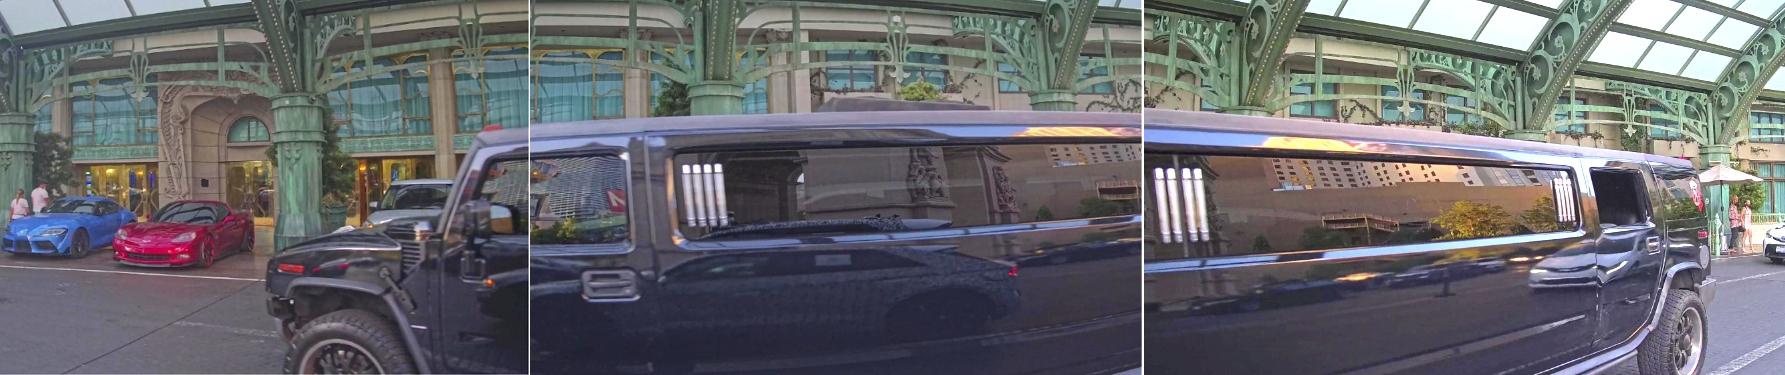 Shots from three Motional robotaxi cameras shows the full length of a black stretch limo